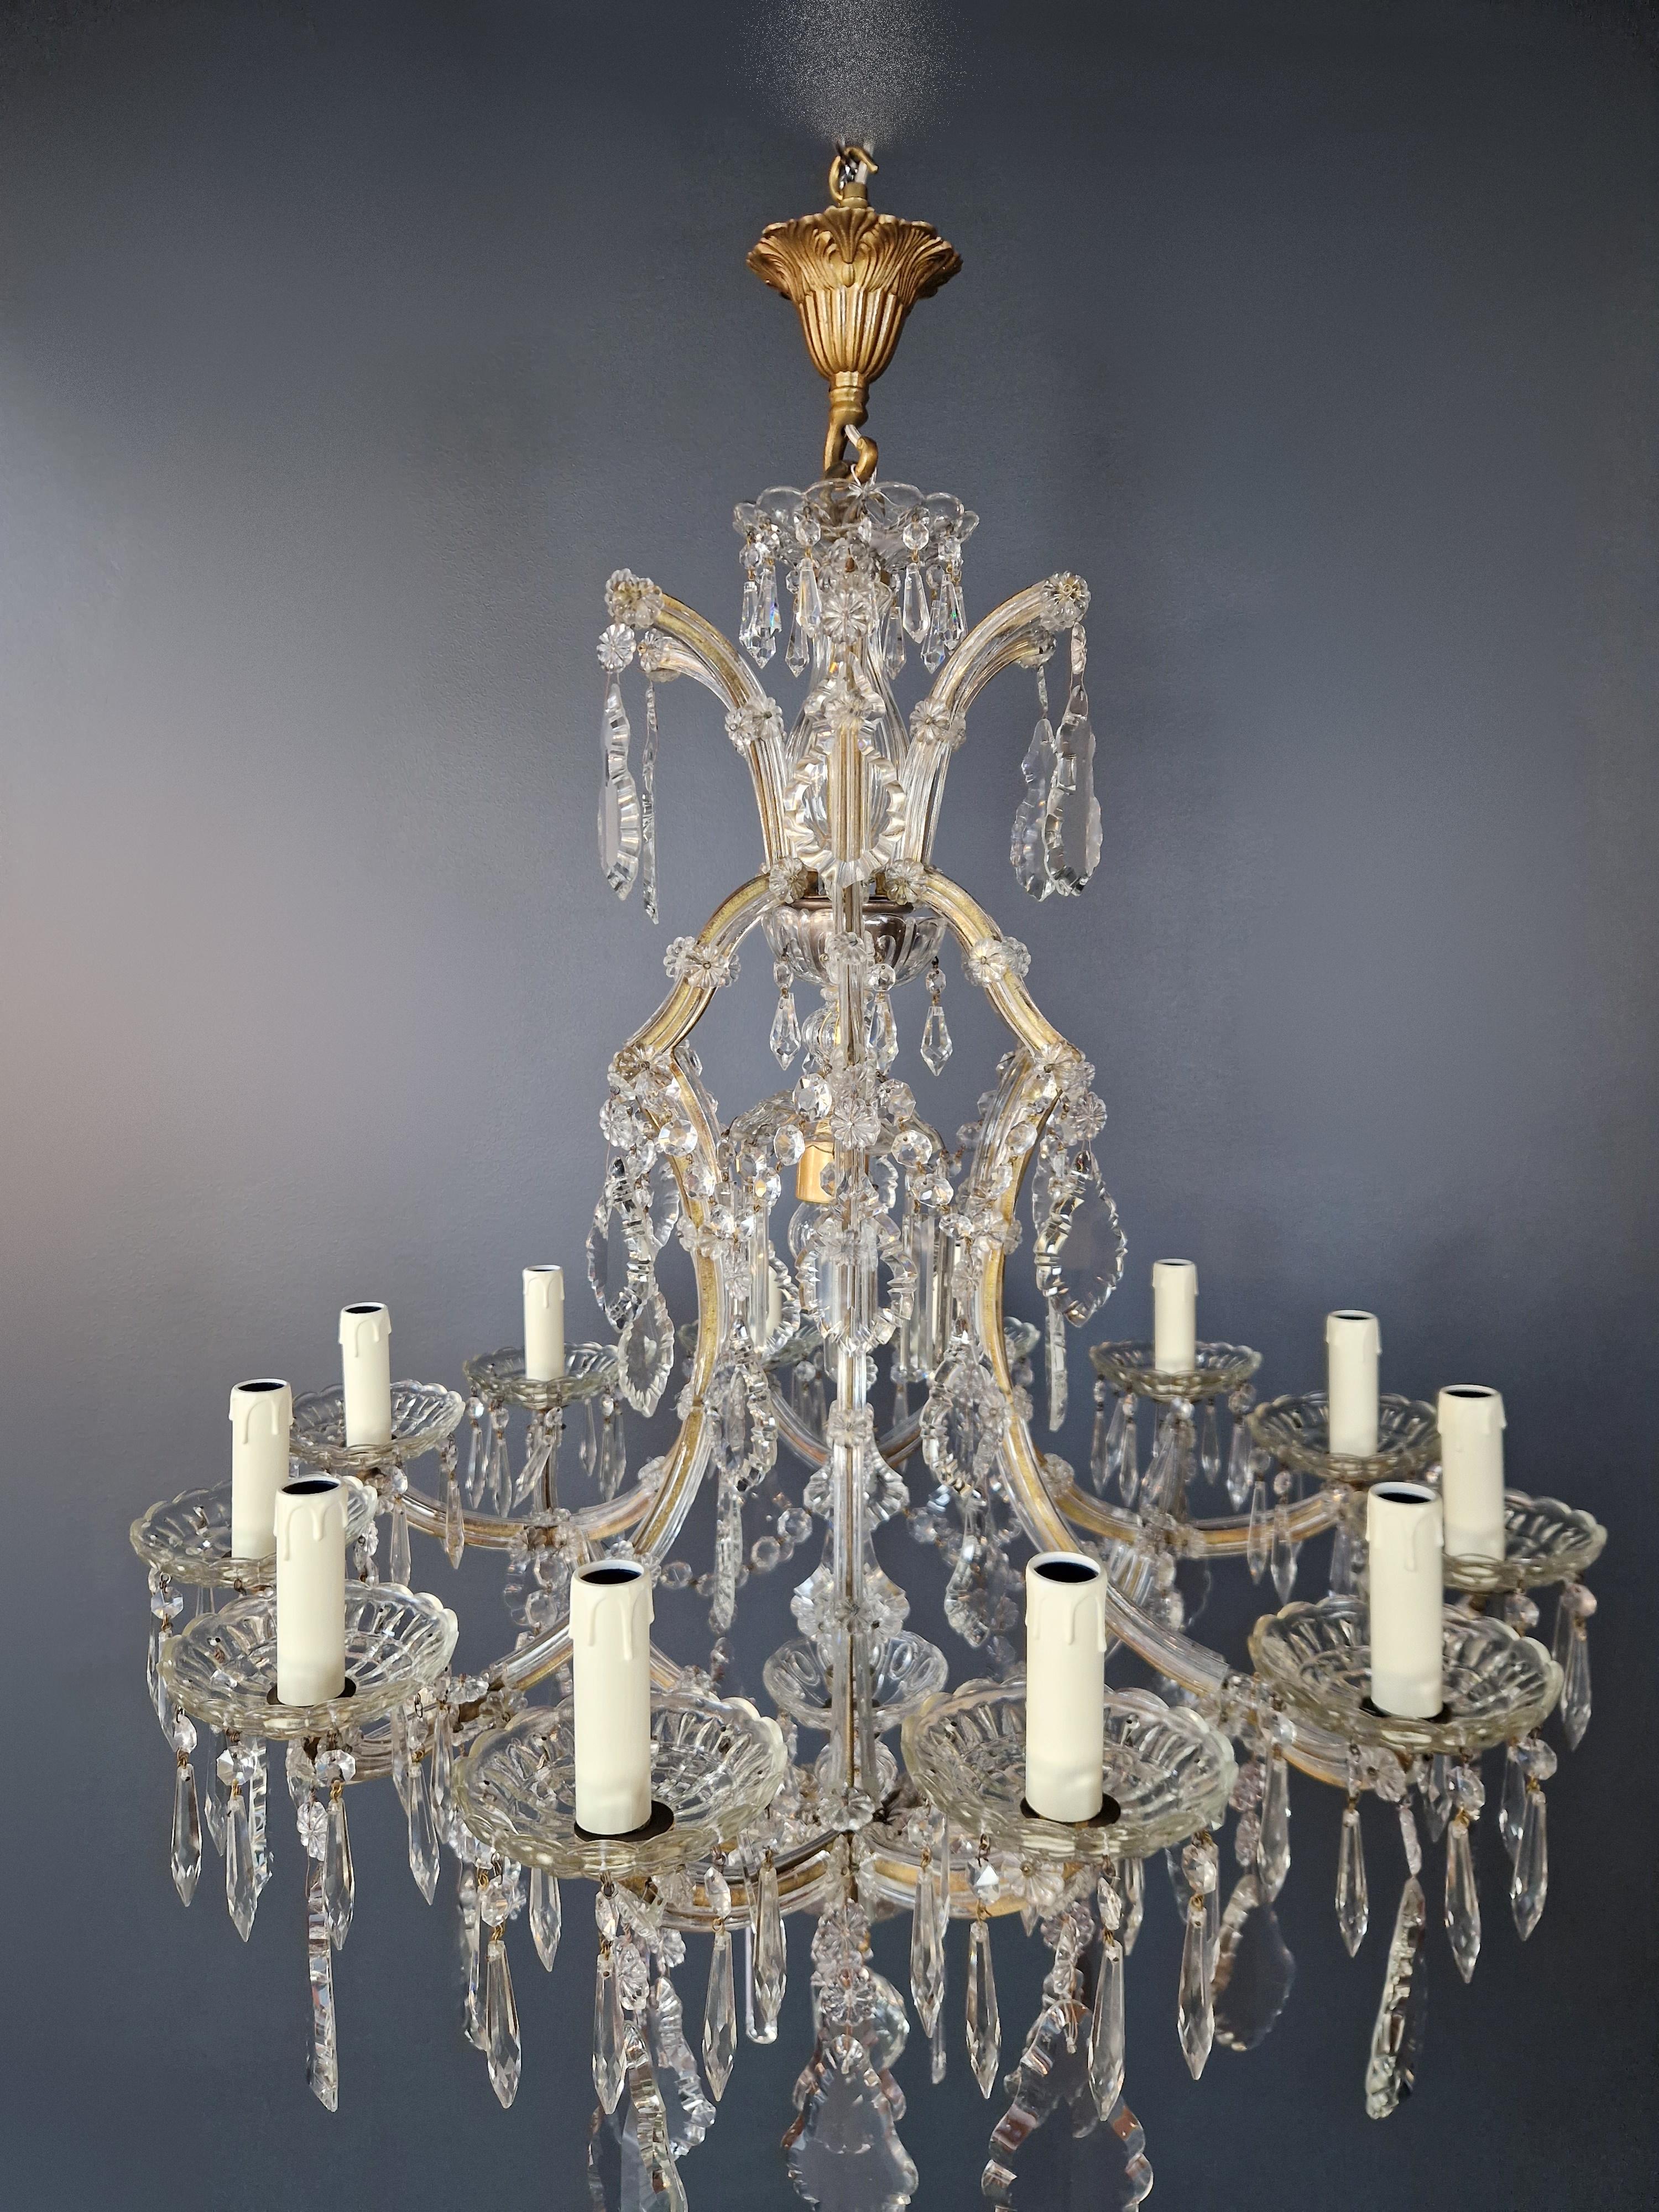 Introducing our cherished old chandelier, lovingly and professionally restored in Berlin! Its electrical wiring is compatible with the US, as it has been meticulously re-wired and is ready to be hung. Not a single crystal is missing, as the cabling